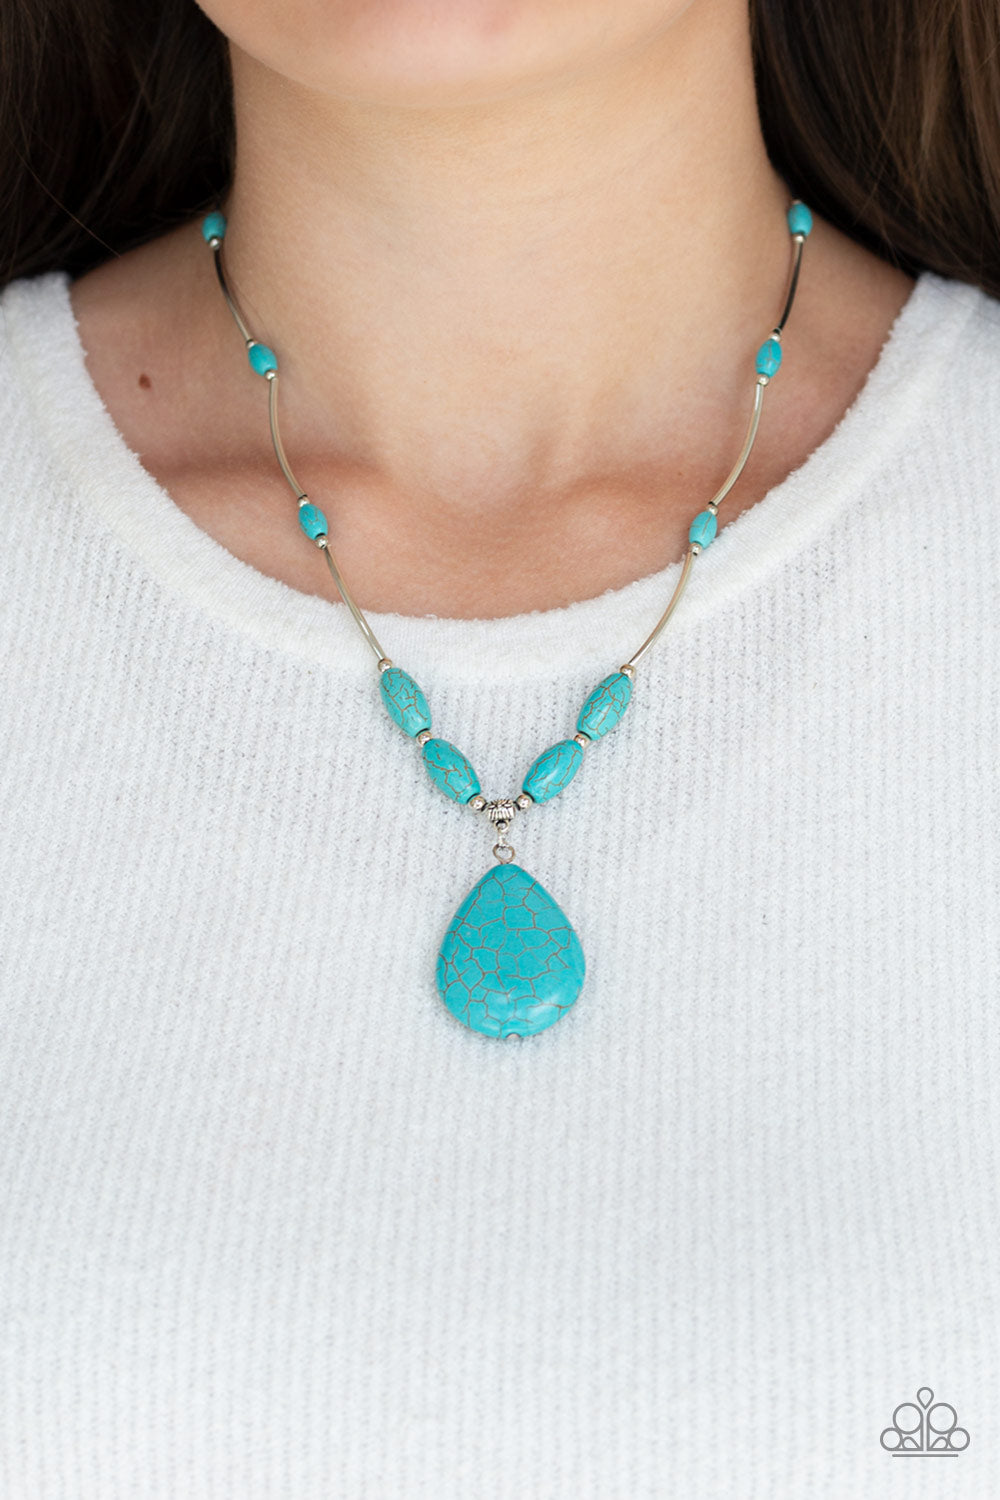 Necklace, Sensitive Skin, Hypoallergenic Jewelry, blue, turquoise, natural stones